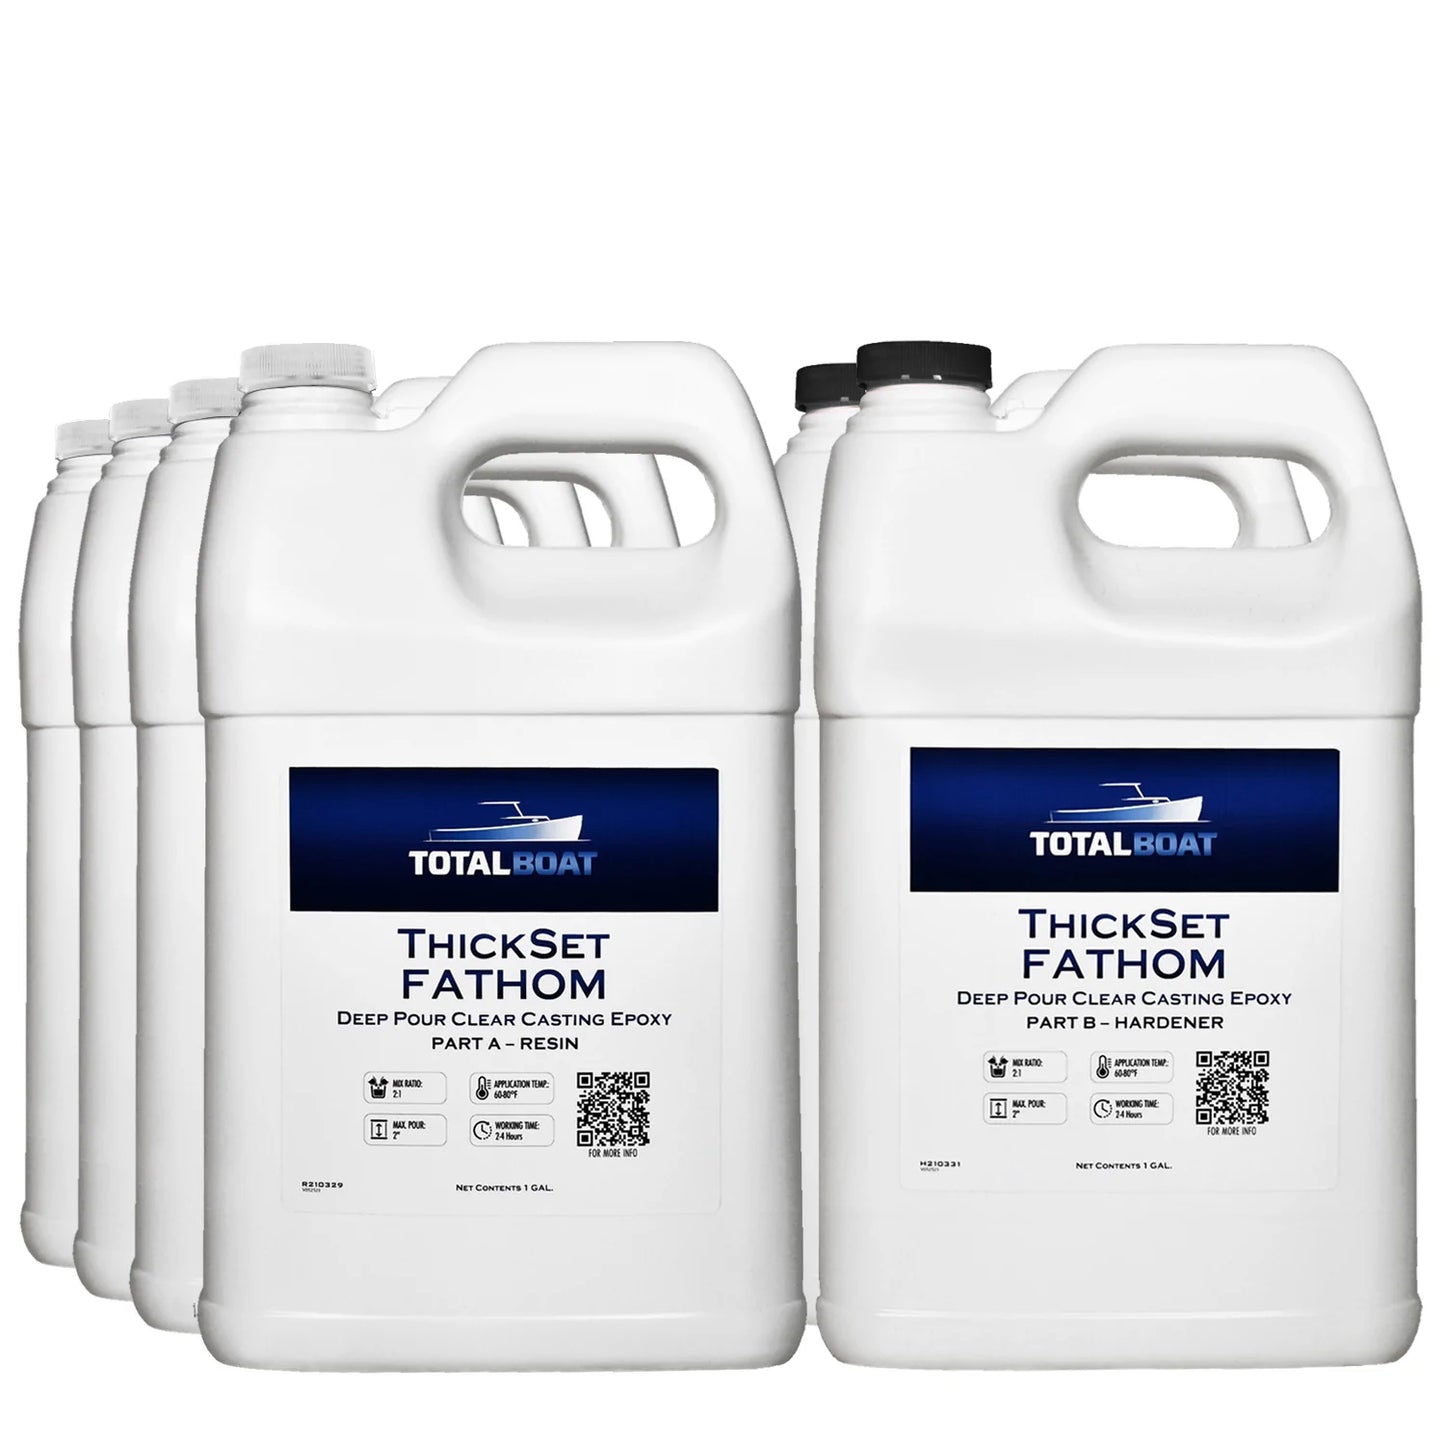 EPOXY Resin 1 Gal Kit, General Purpose (Coating, Table Tops, Casting)